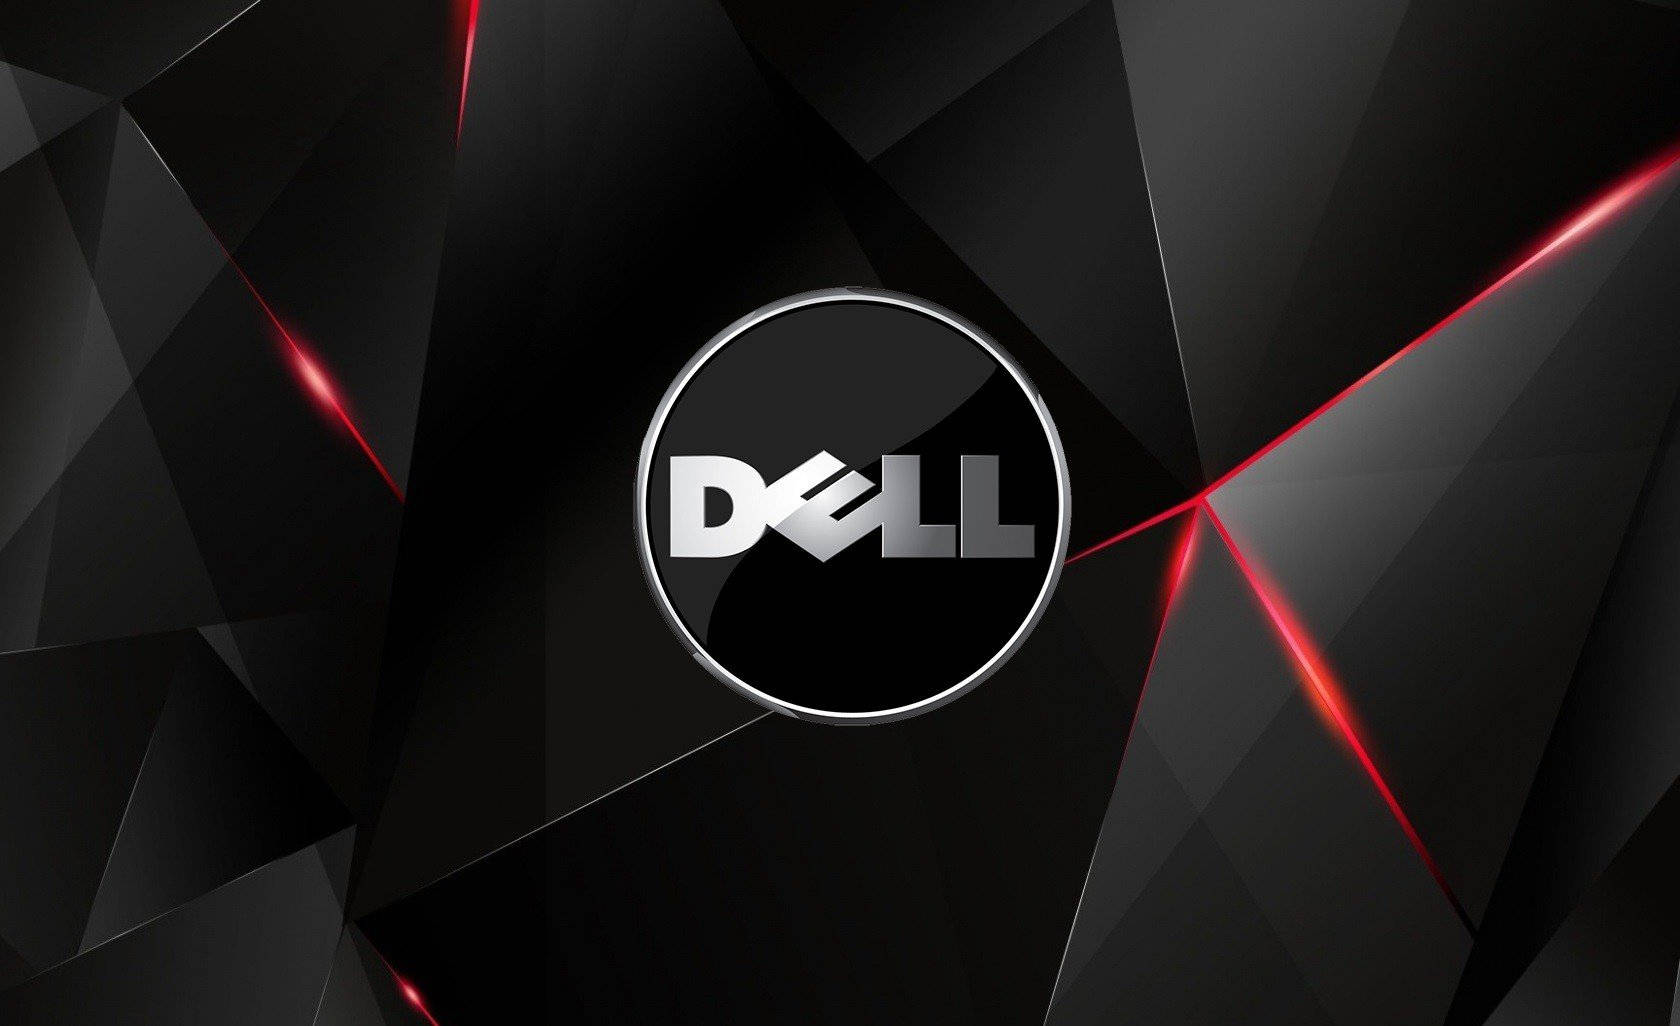 Dell Hd Logo With Red And Black Design Wallpaper